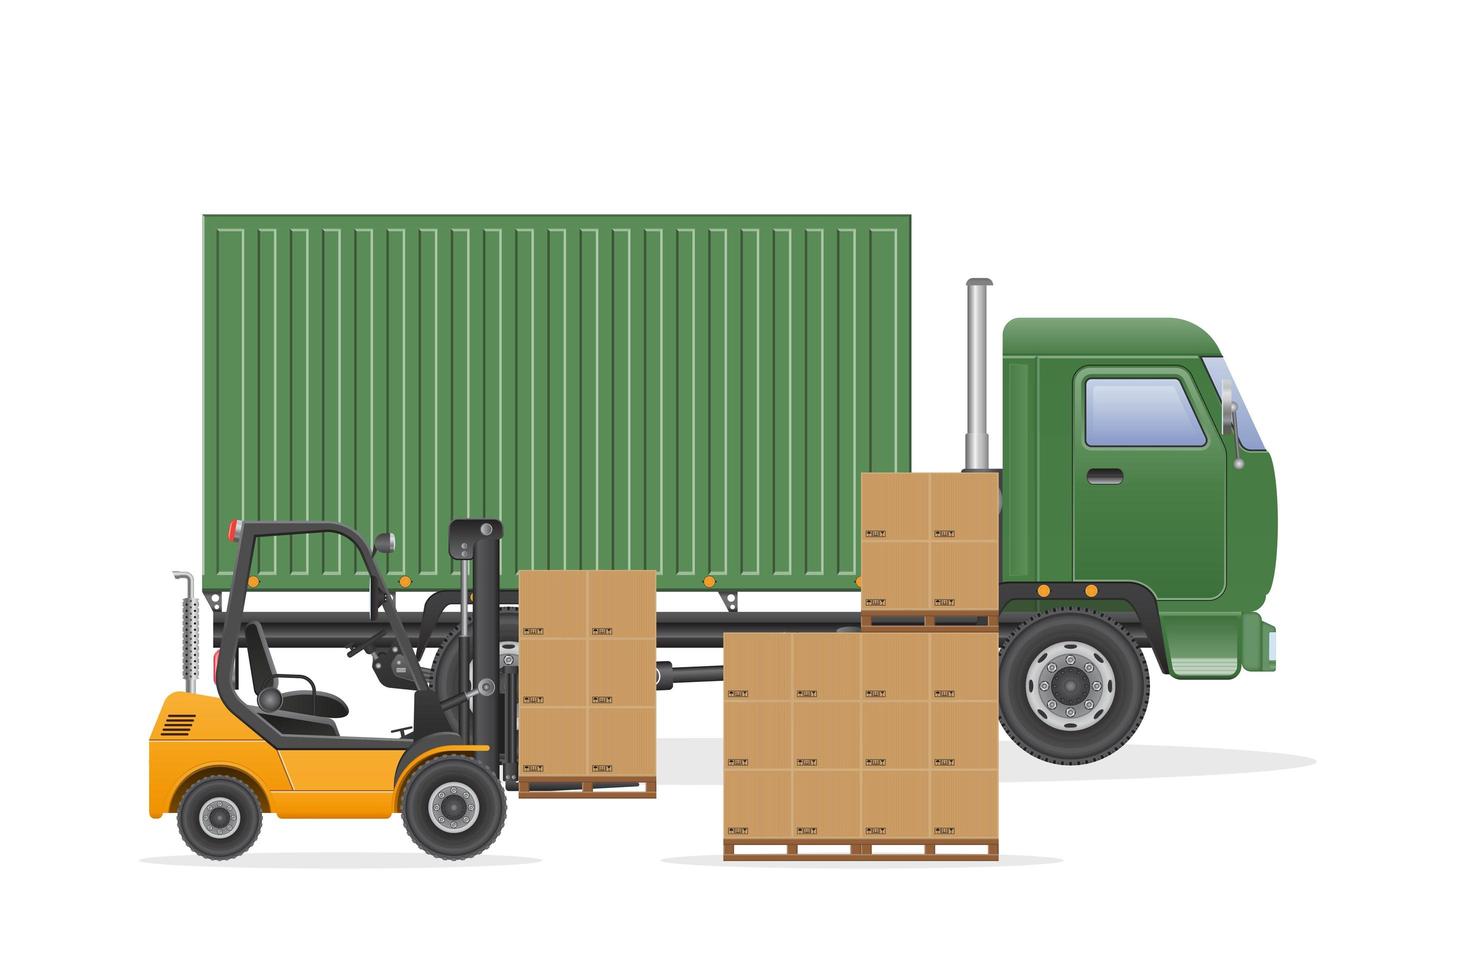 Green Cargo Truck Delivery With Forklift Download Free Vectors Clipart Graphics Vector Art